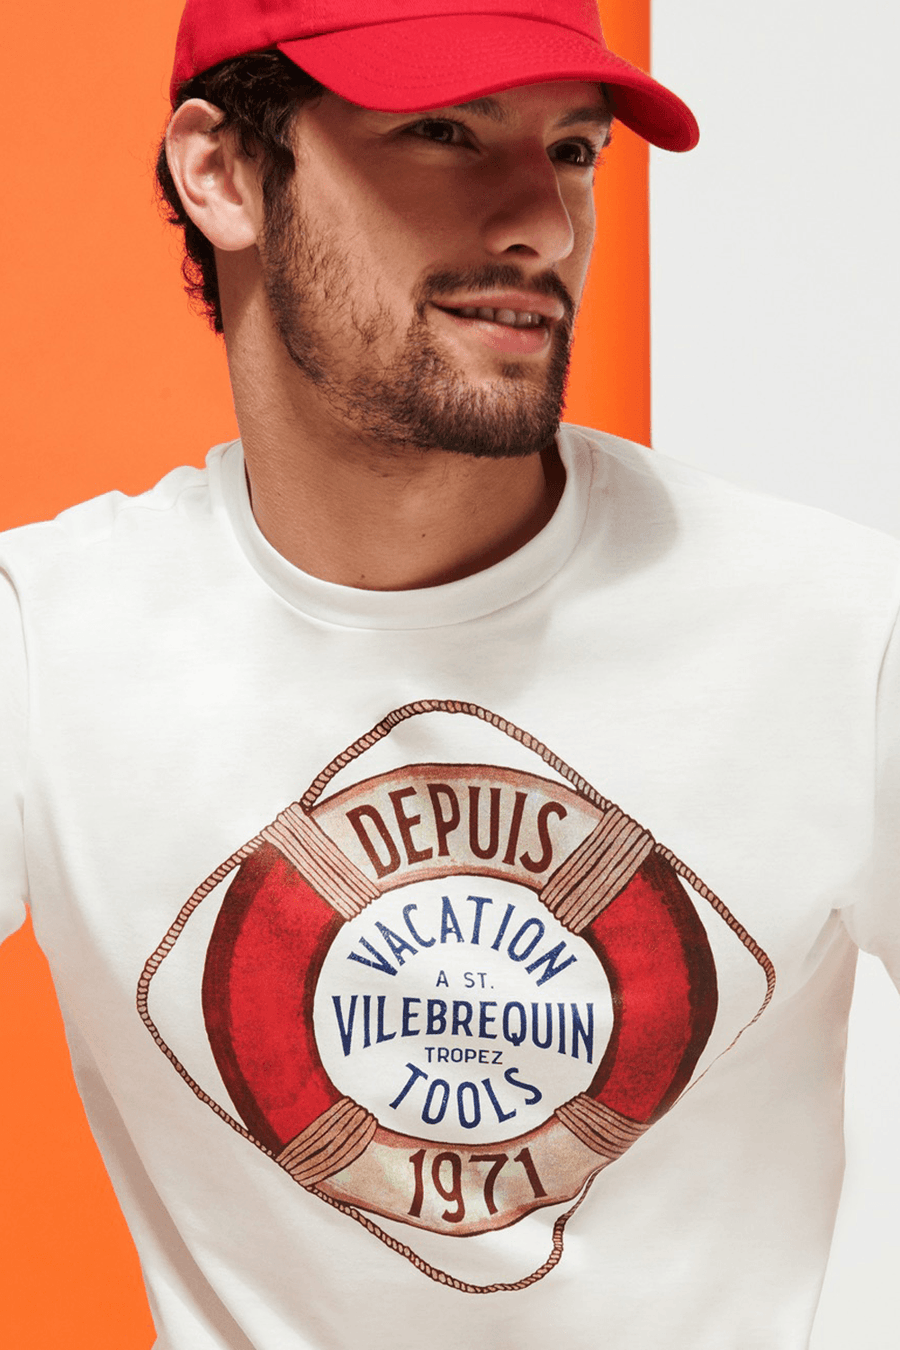 Buy the Vilebrequin Vacation T-Shirt in White at Intro. Spend £50 for free UK delivery. Official stockists. We ship worldwide.